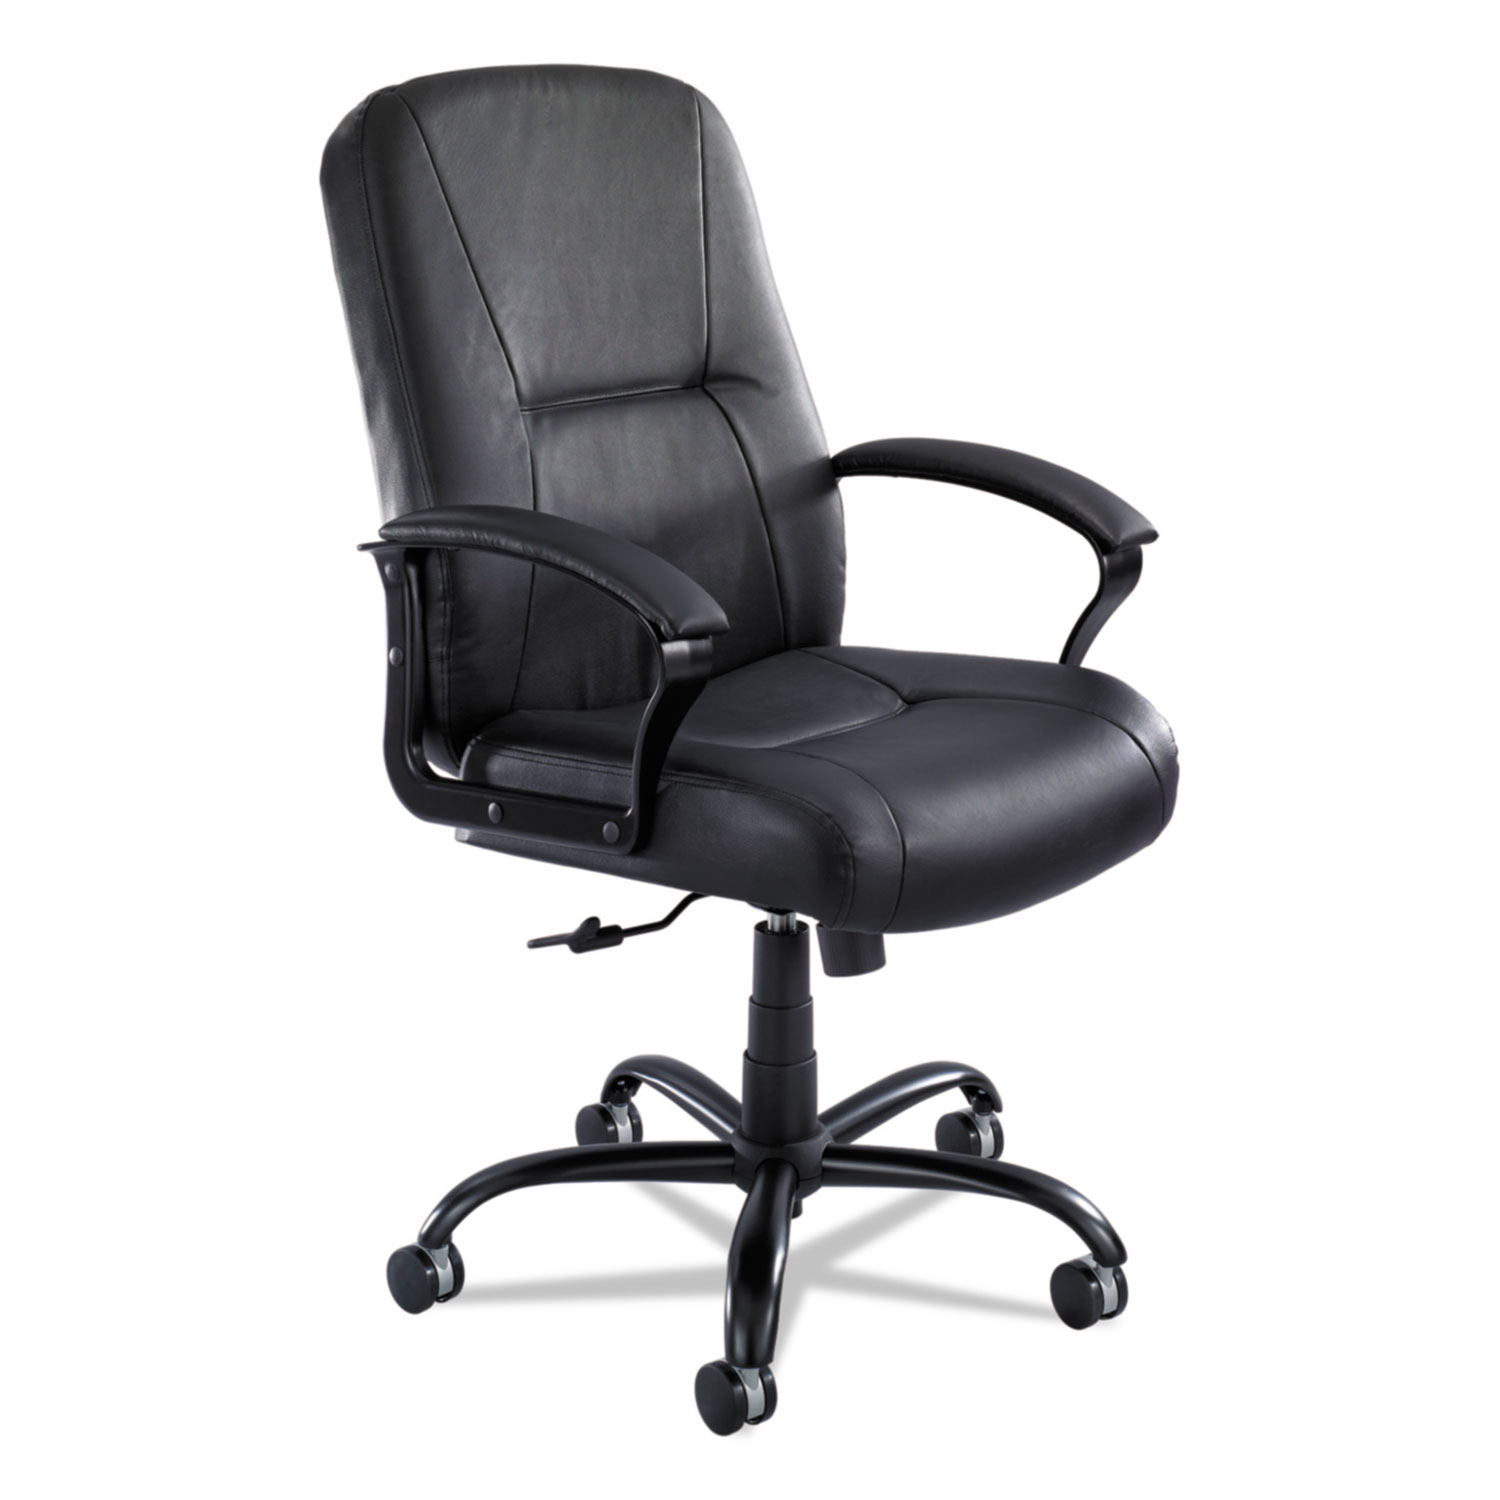  Safco 3500BL Serenity Big and Tall High Back Leather Chair, Supports up to 500 lbs., Black Seat/Black Back, Black Base (SAF3500BL) 